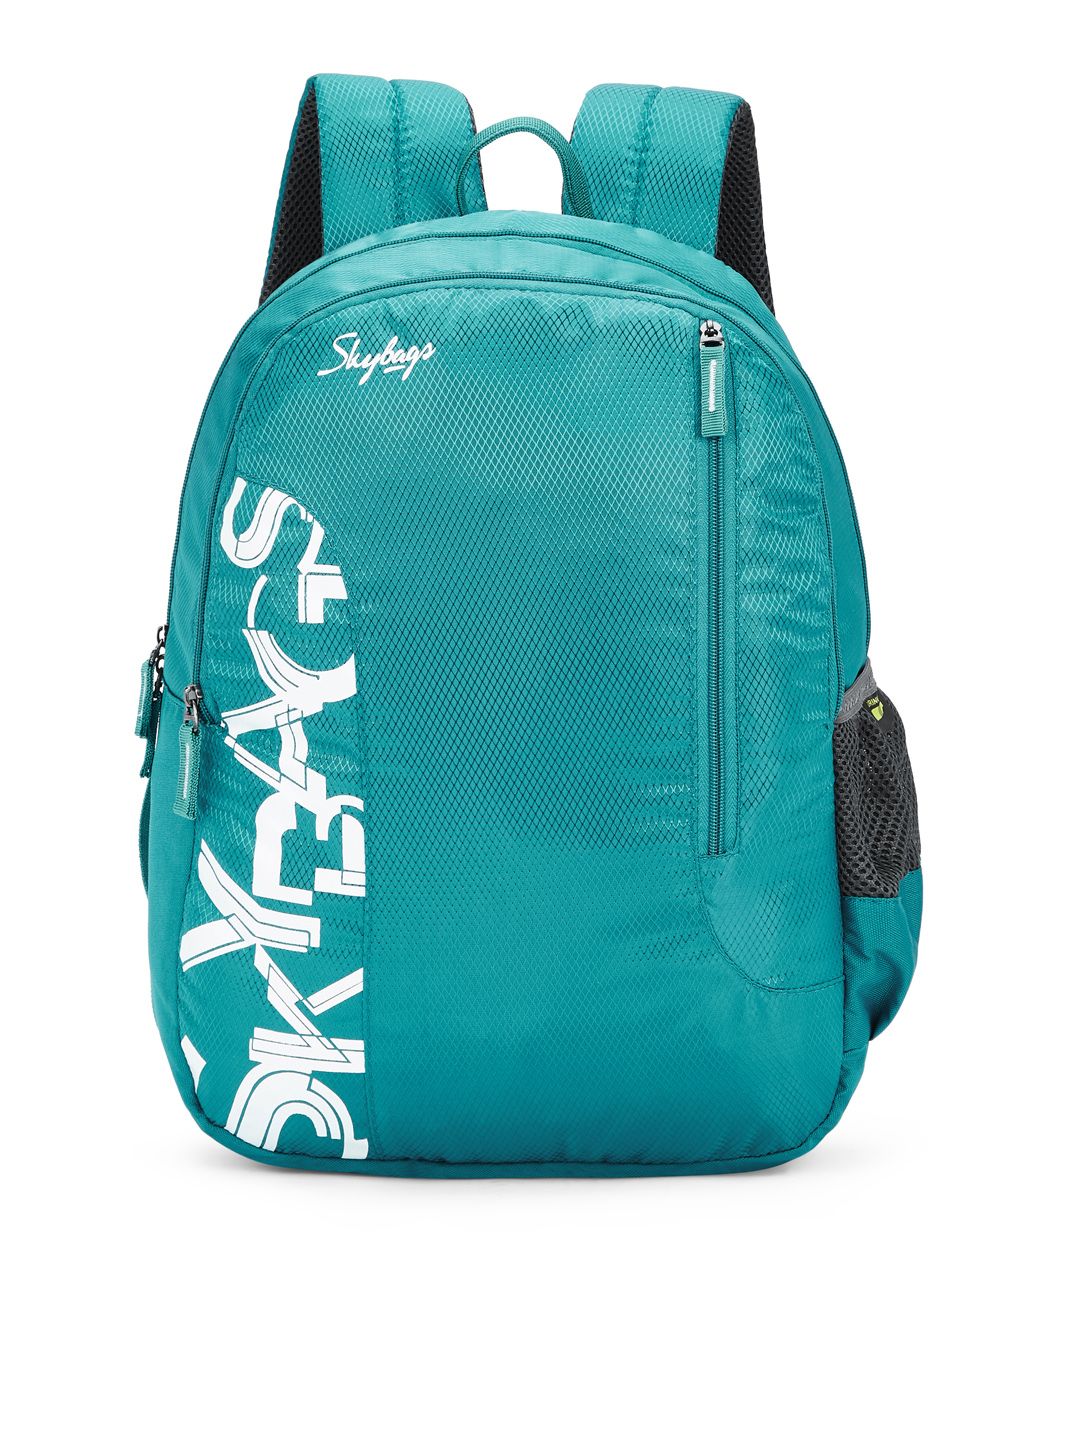 Skybags Unisex Sea Green BRAT Printed Backpack Price in India